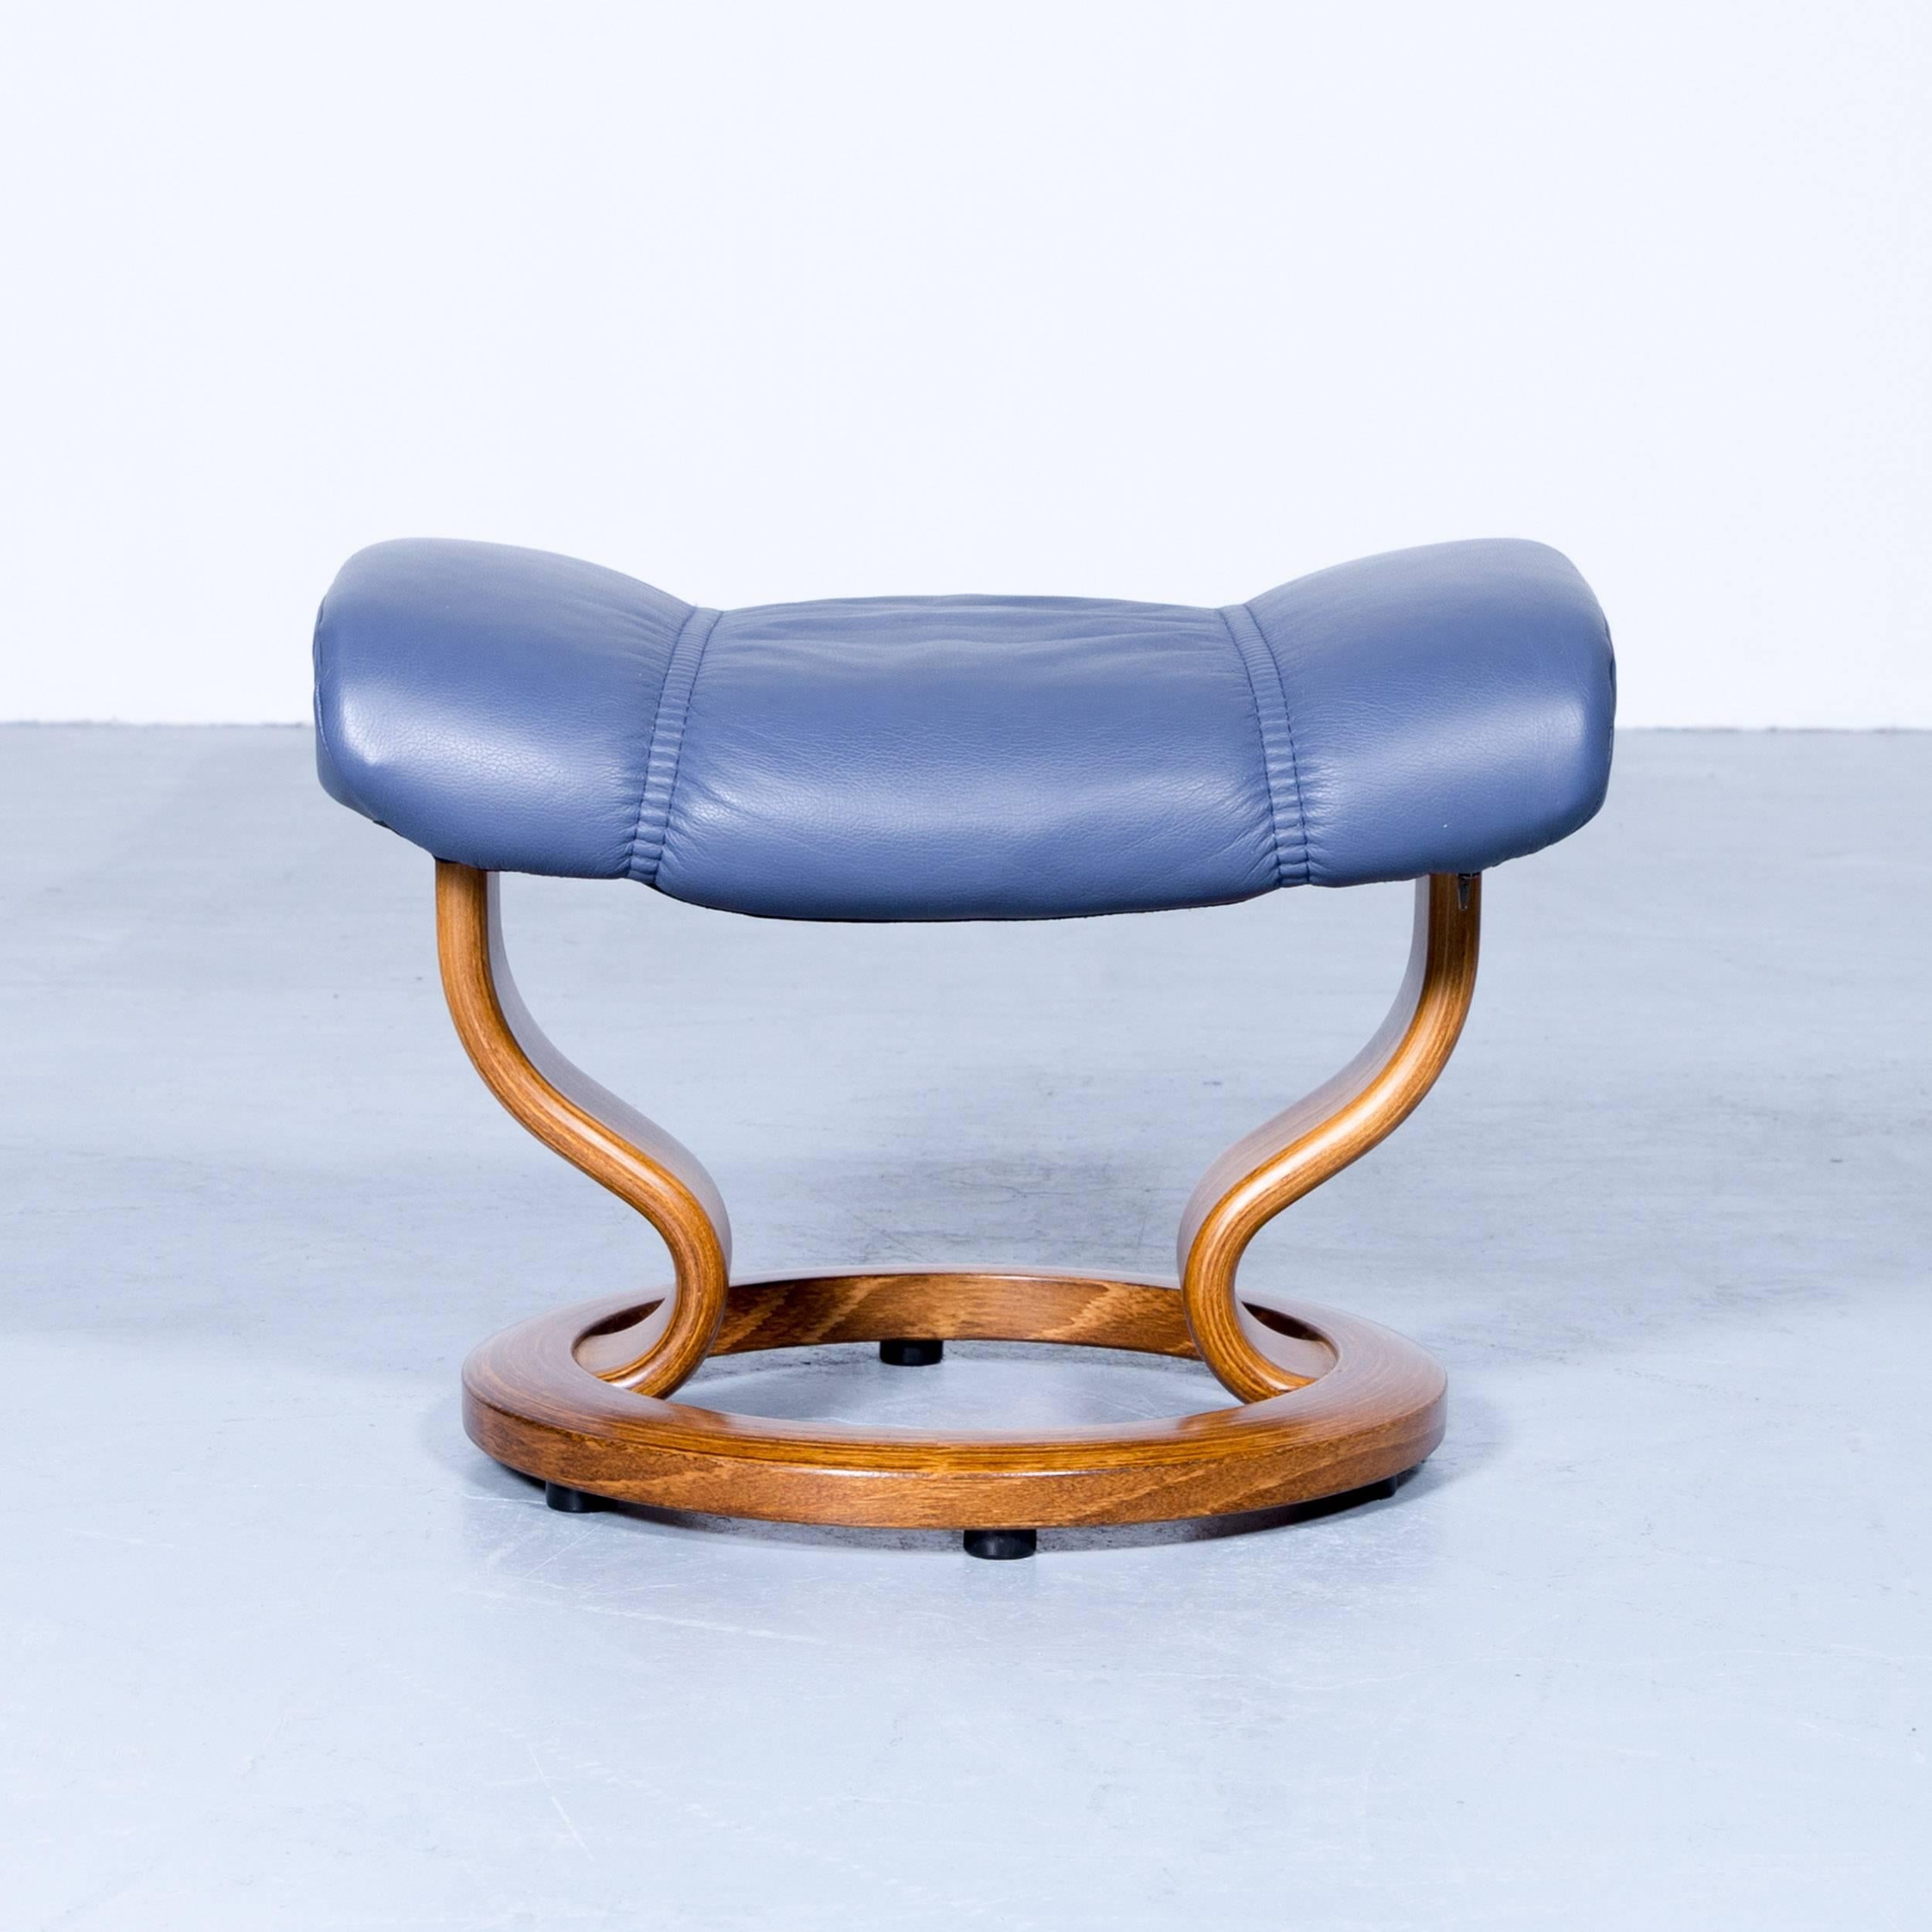 Ekornes Stressless consul footstool leather blue modern footrest in a minimalistic and modern design, with convenient functions, made for pure comfort and flexibility.